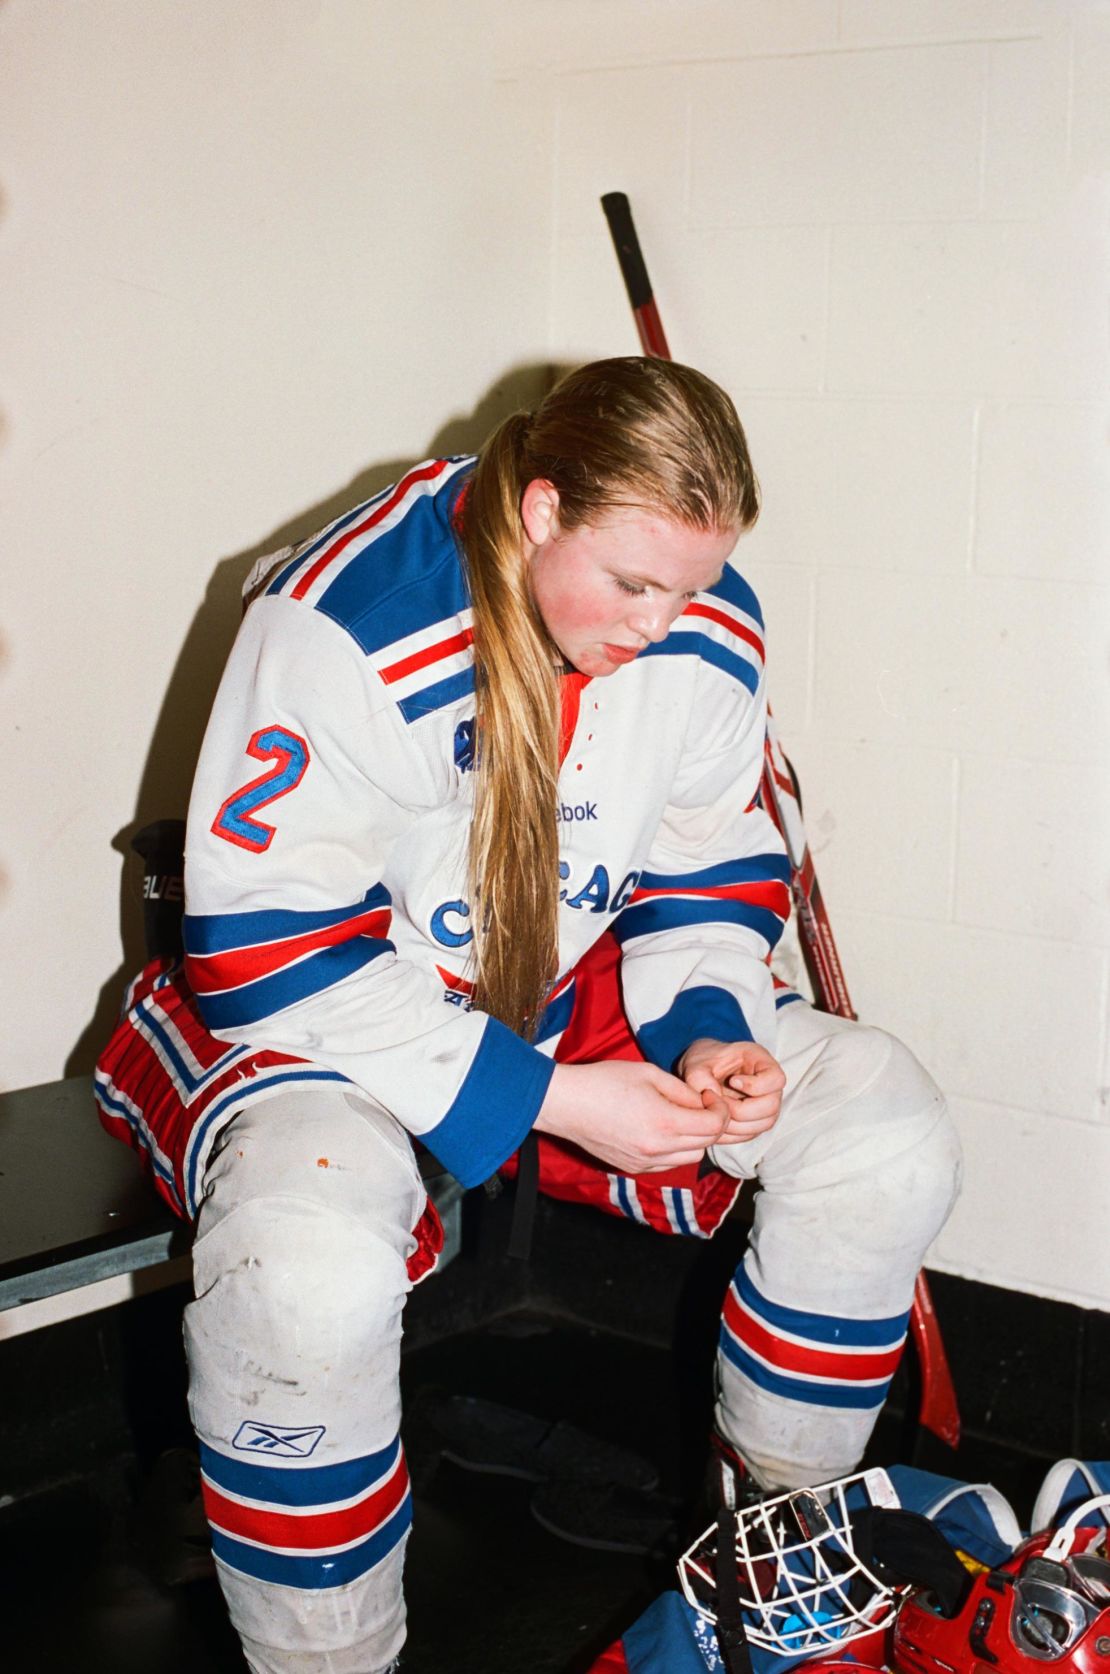 The bright colors and stark white of hockey players' uniforms, combined with Paterson's choice to shoot on film and use bright flash, produce an aesthetic that mimics the sports photography of the 80s. 